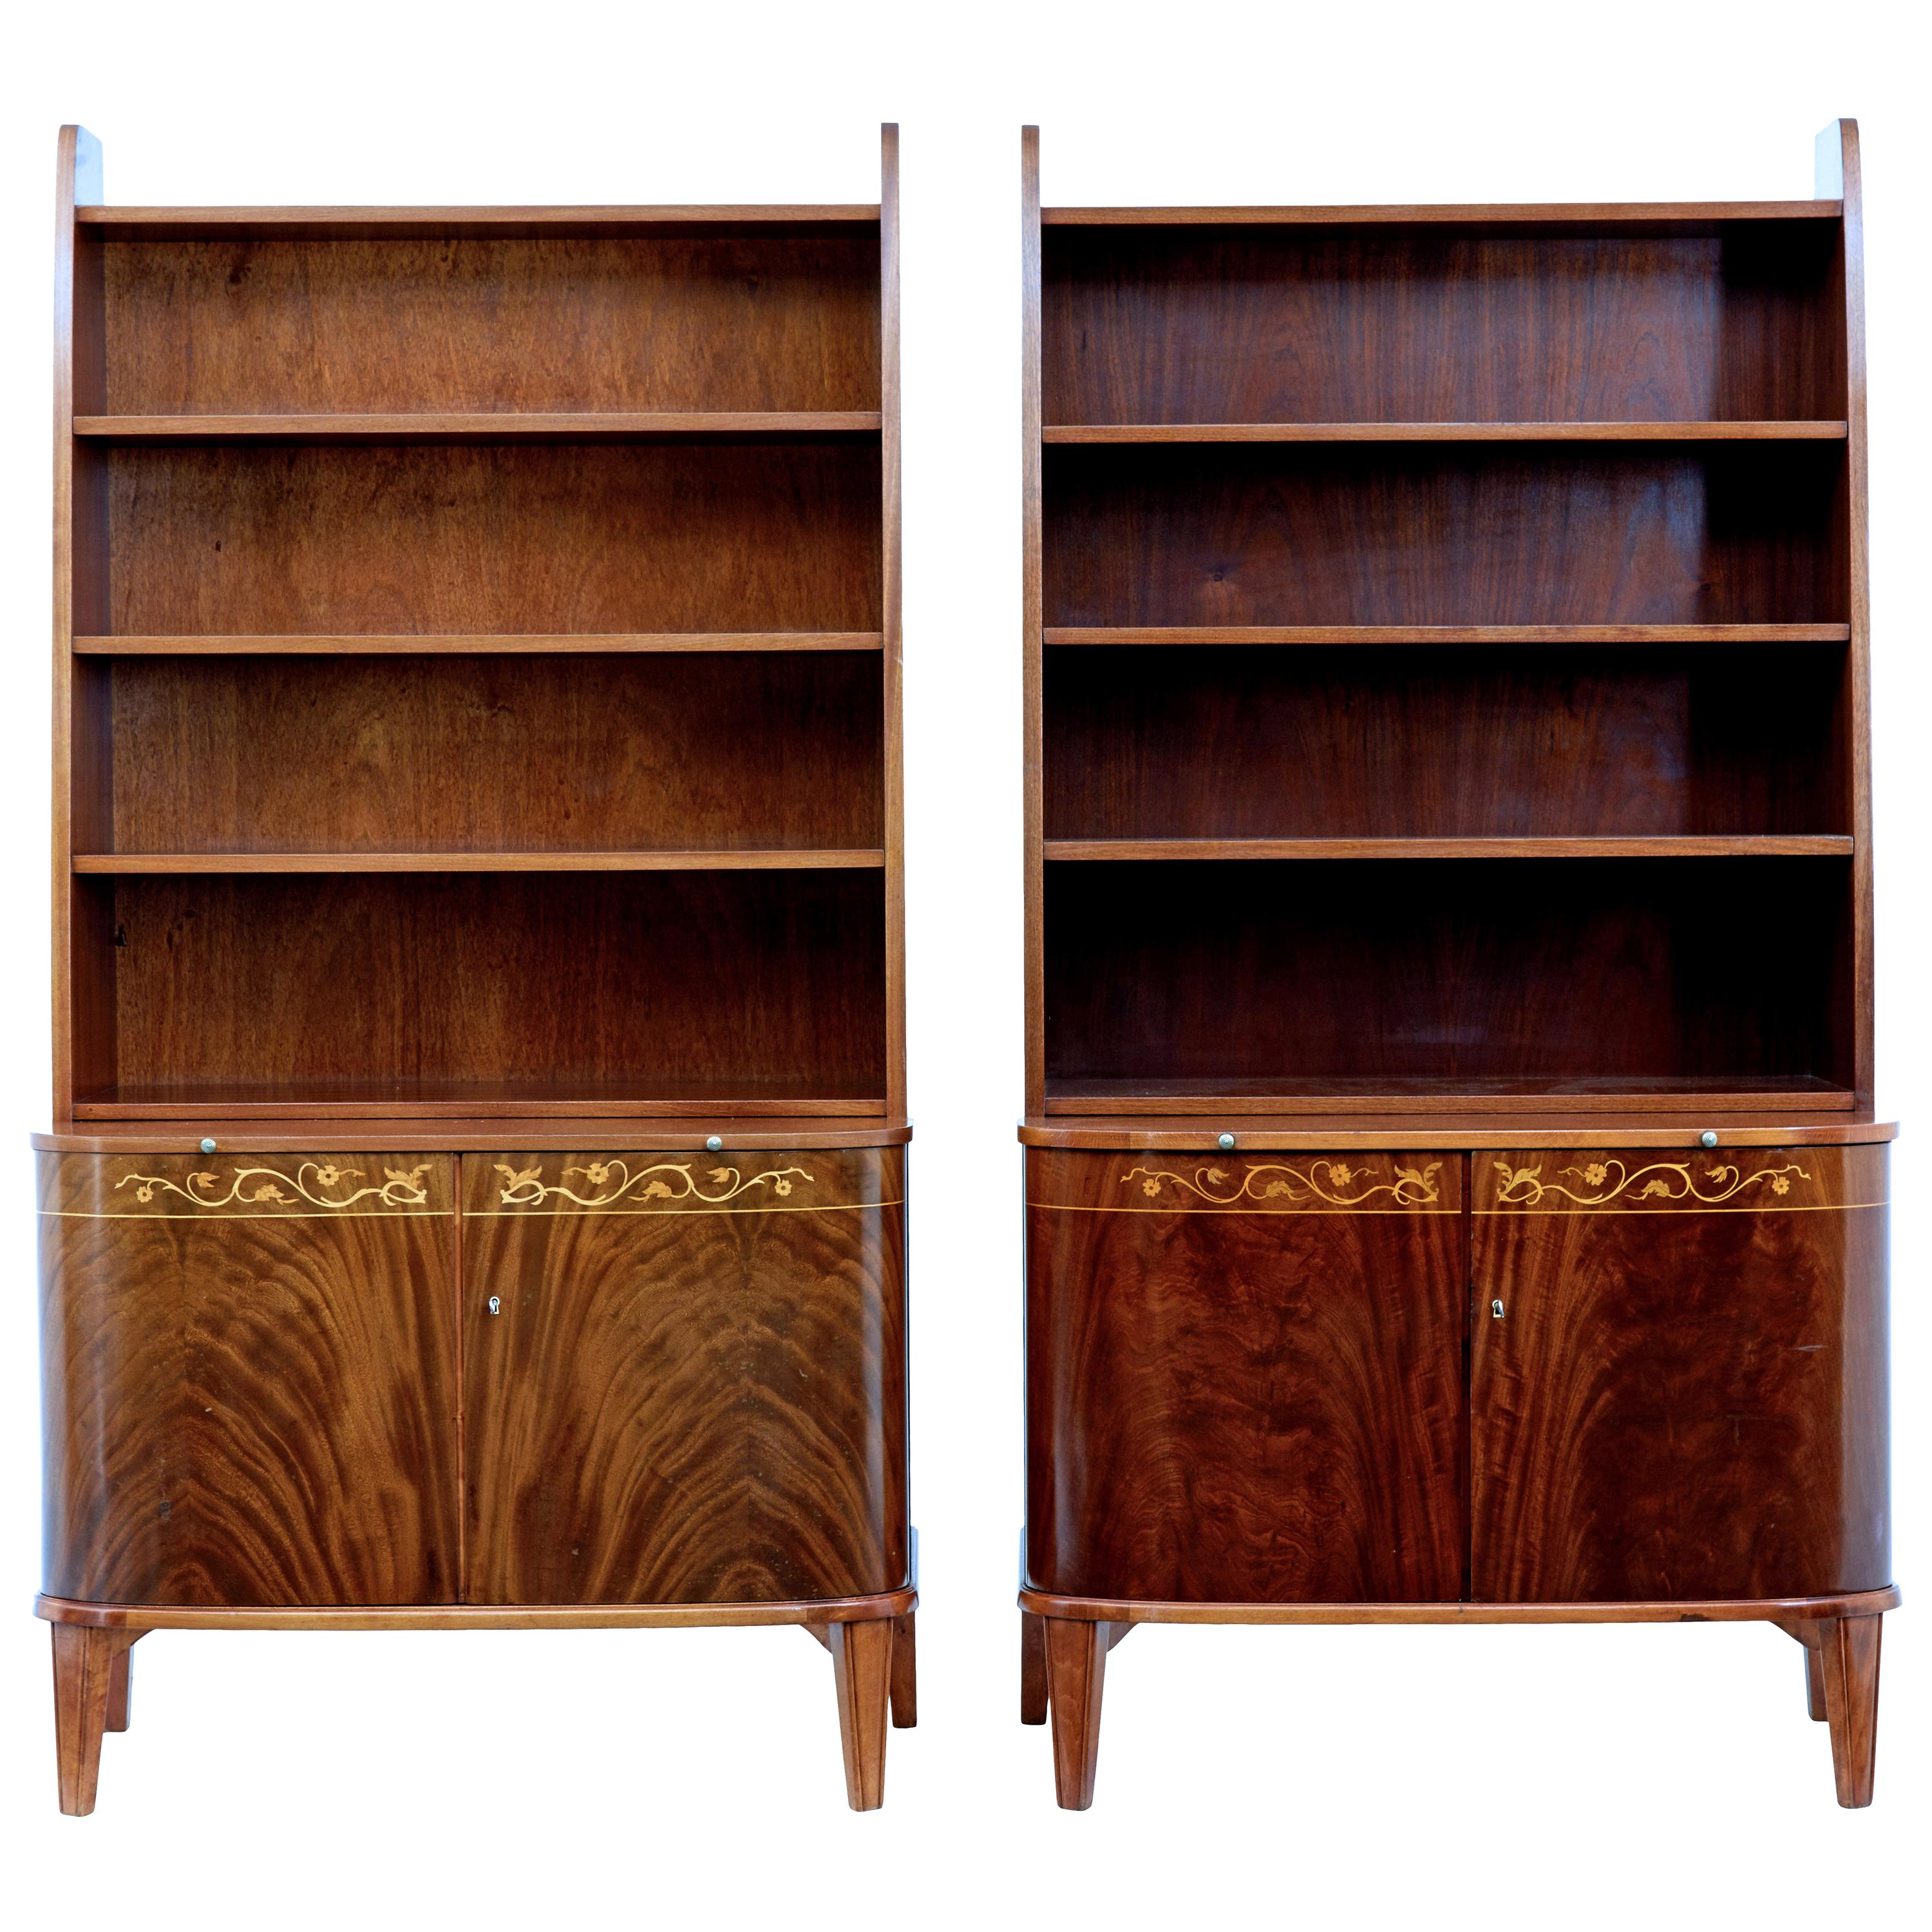 Pair of Mid-20th Century Flame Mahogany Scandinavian Bookcases by Bodafors